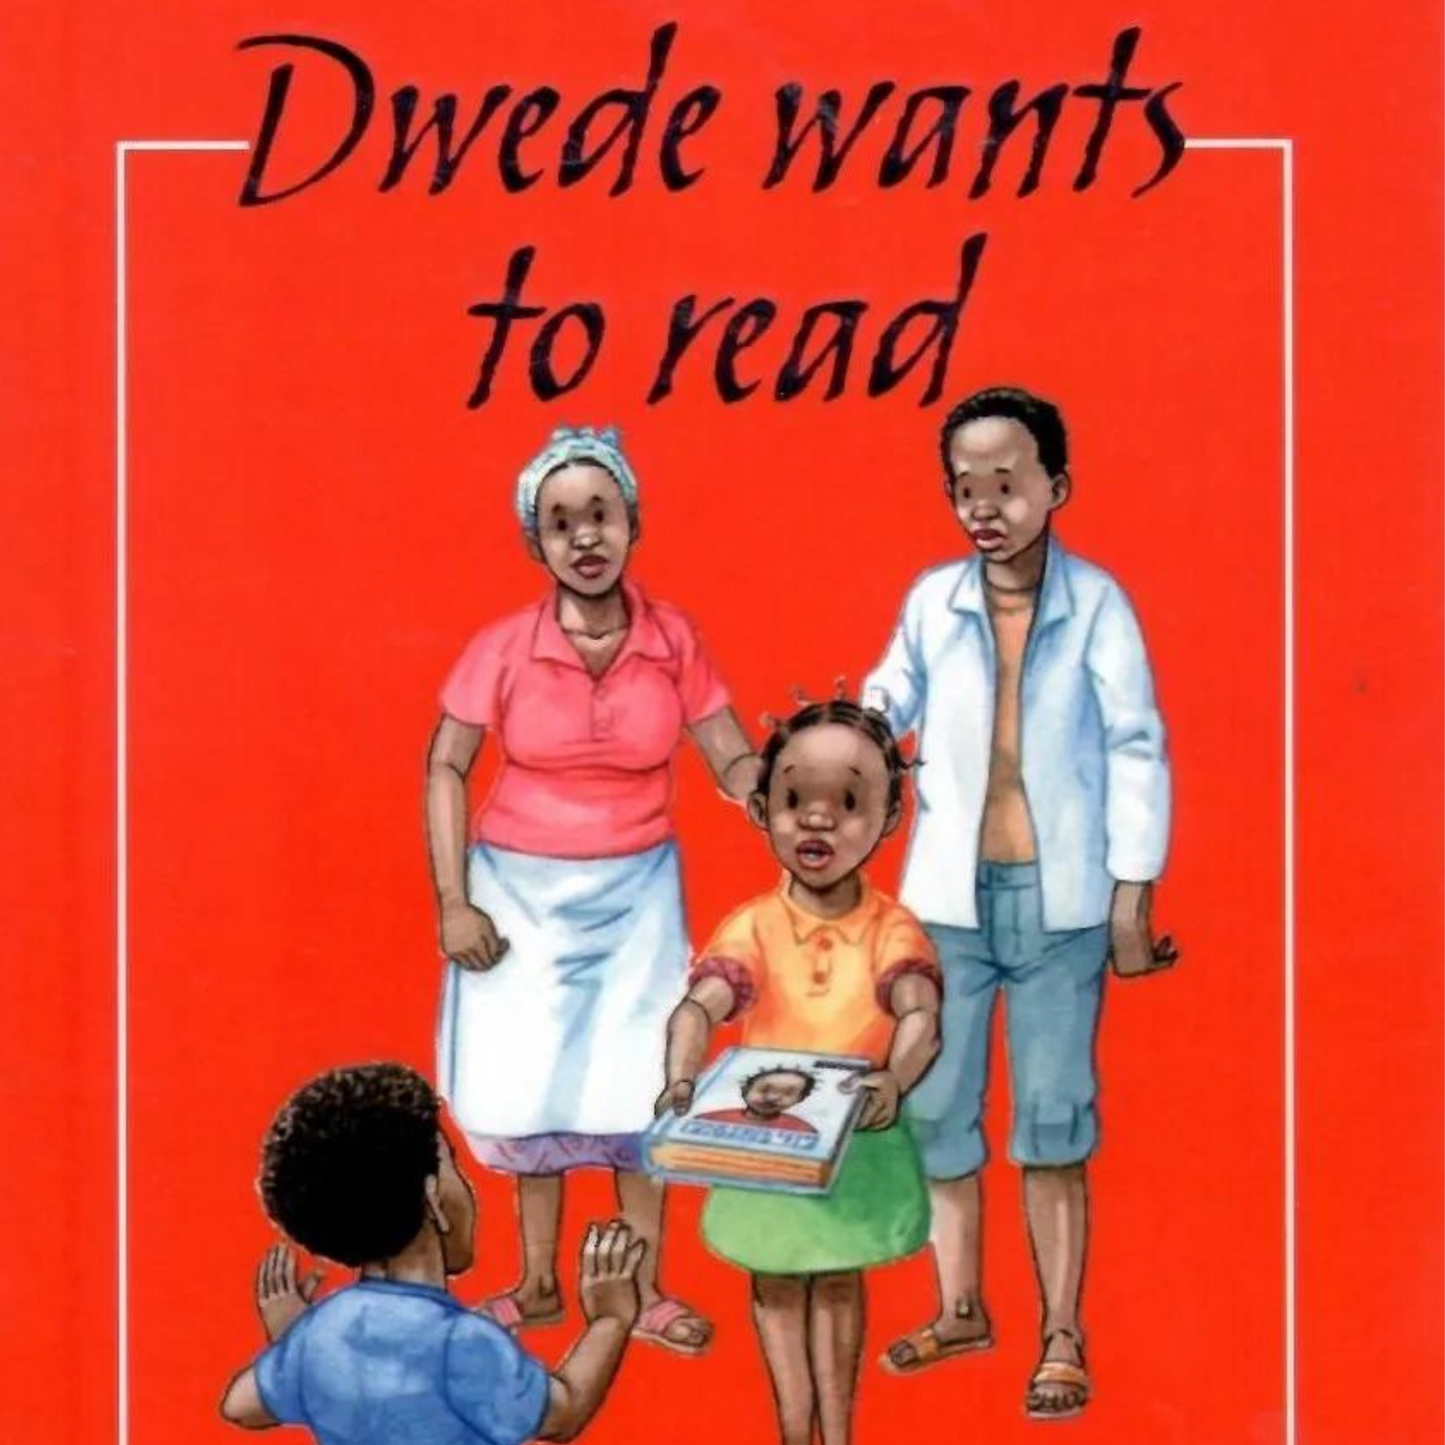 Dwede Wants To Read